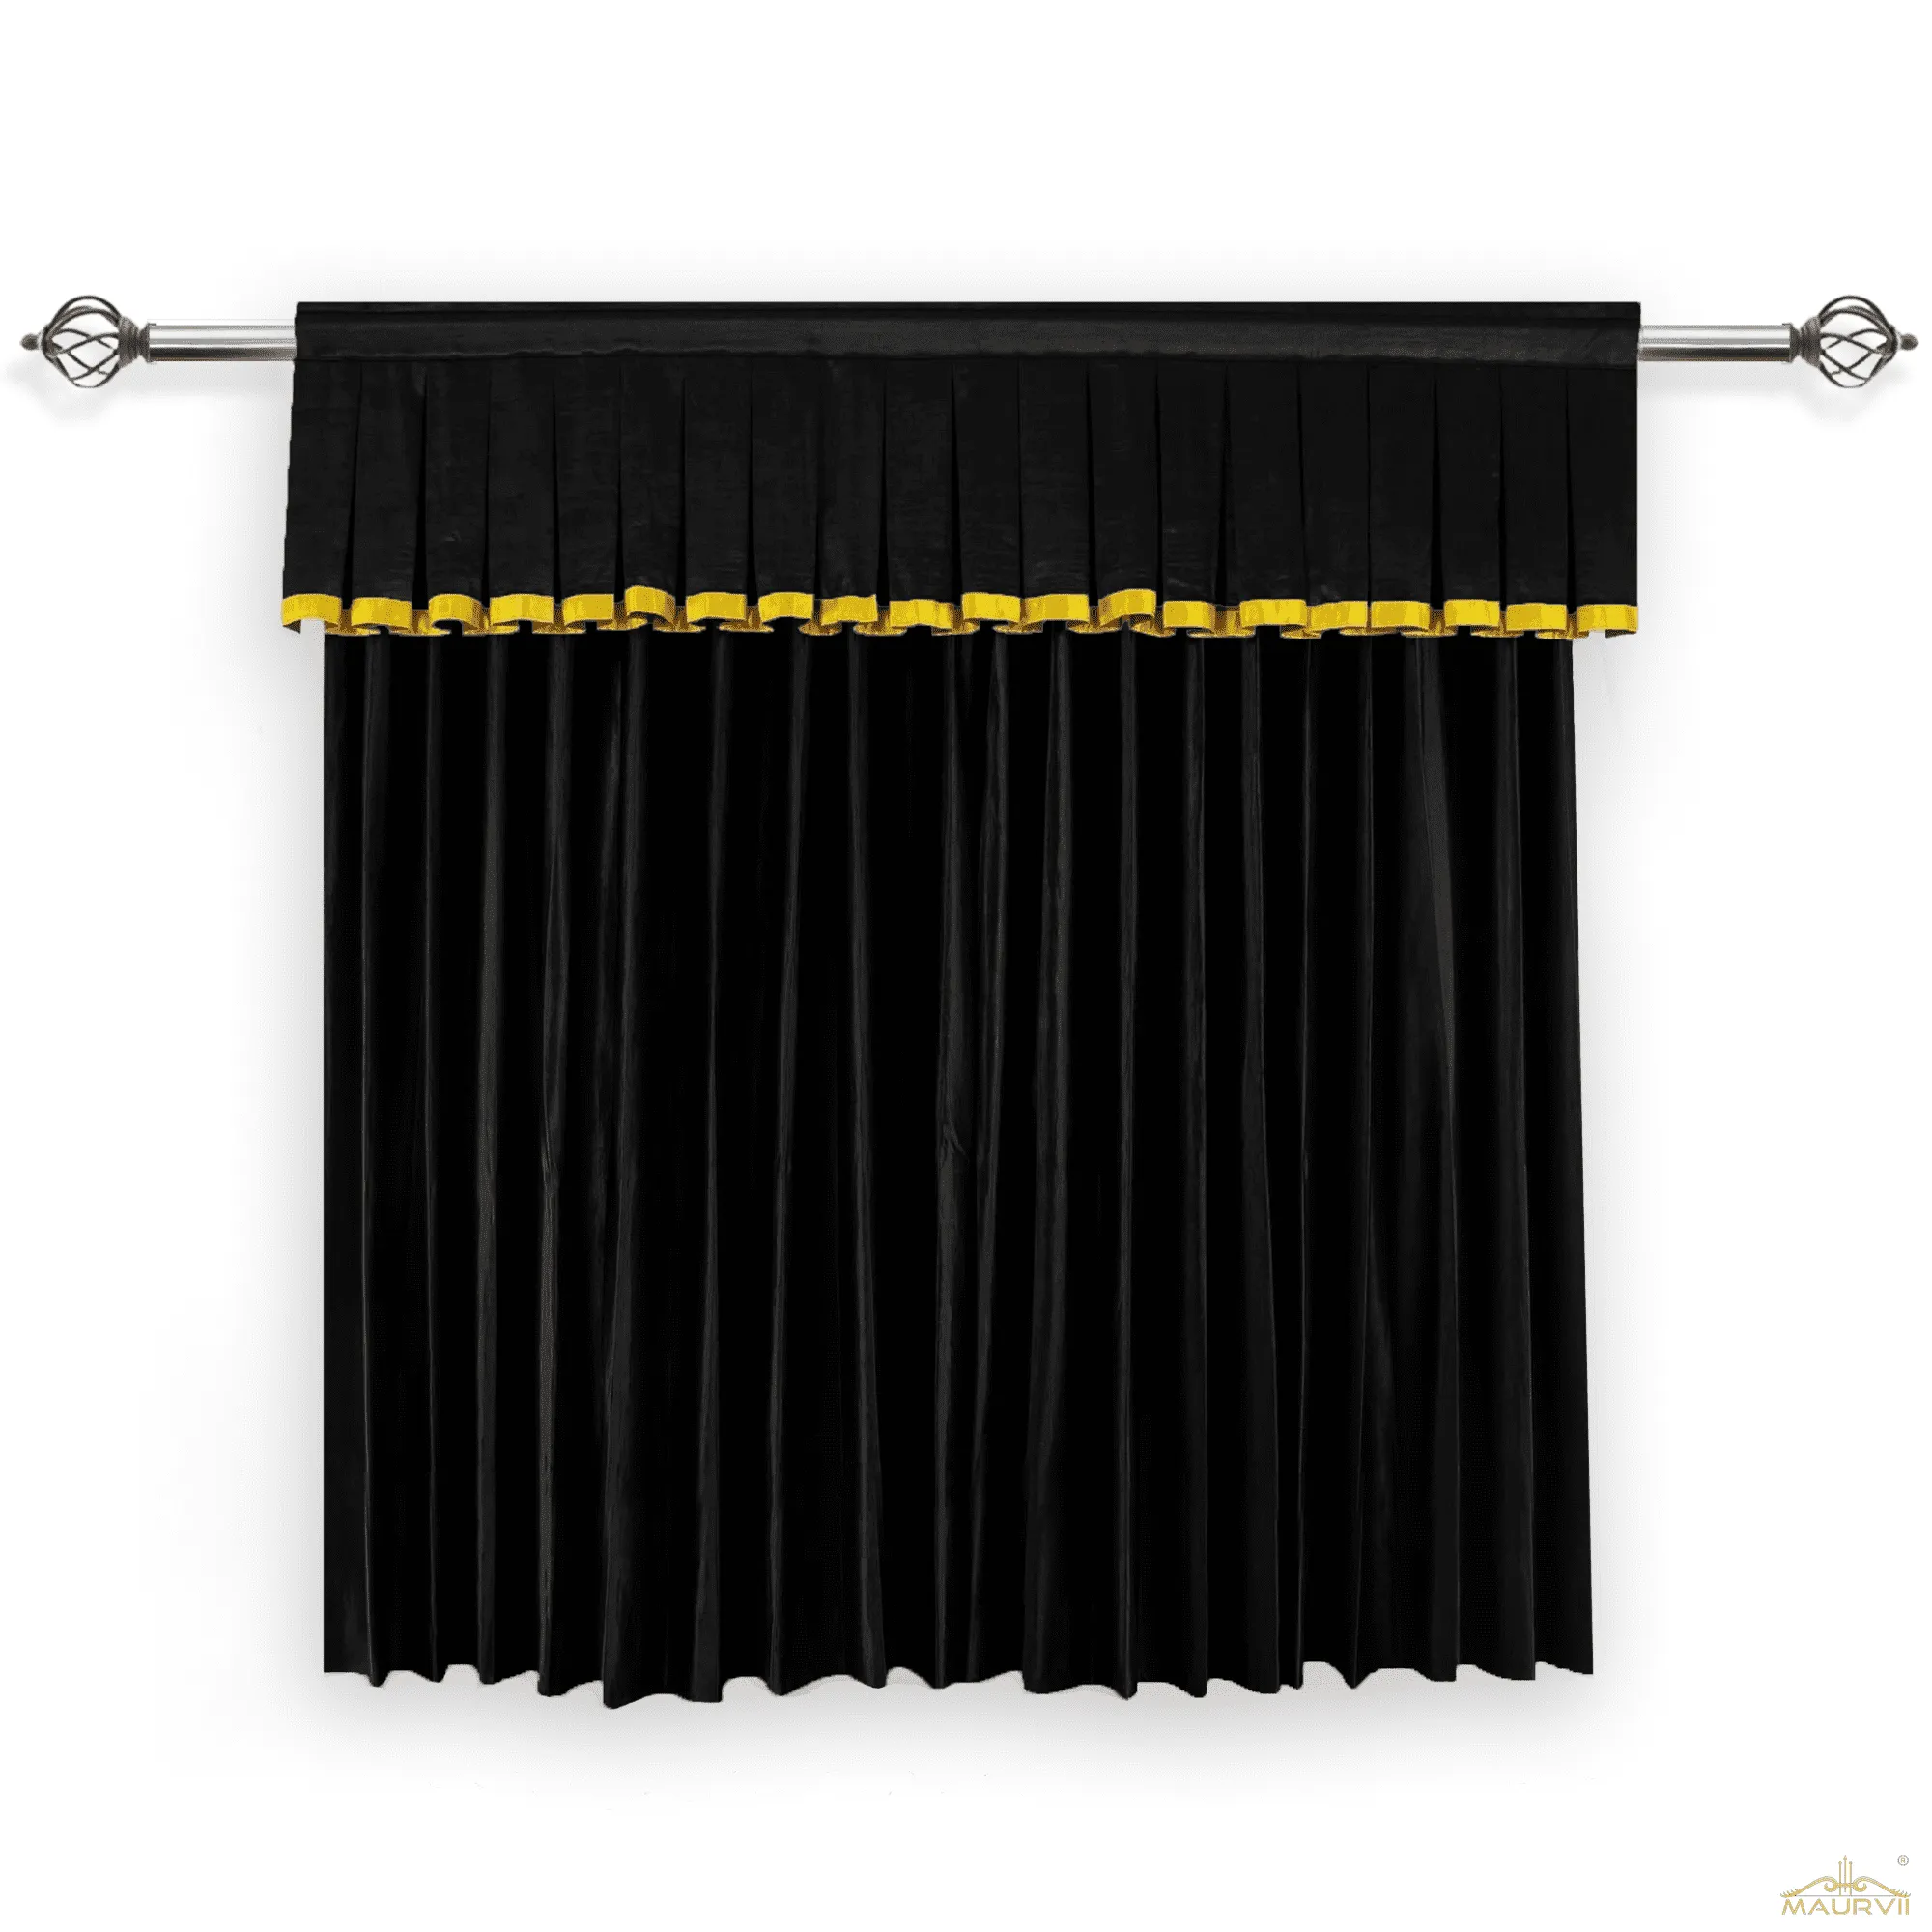 Black Home Theater Curtains For Theater Rooms